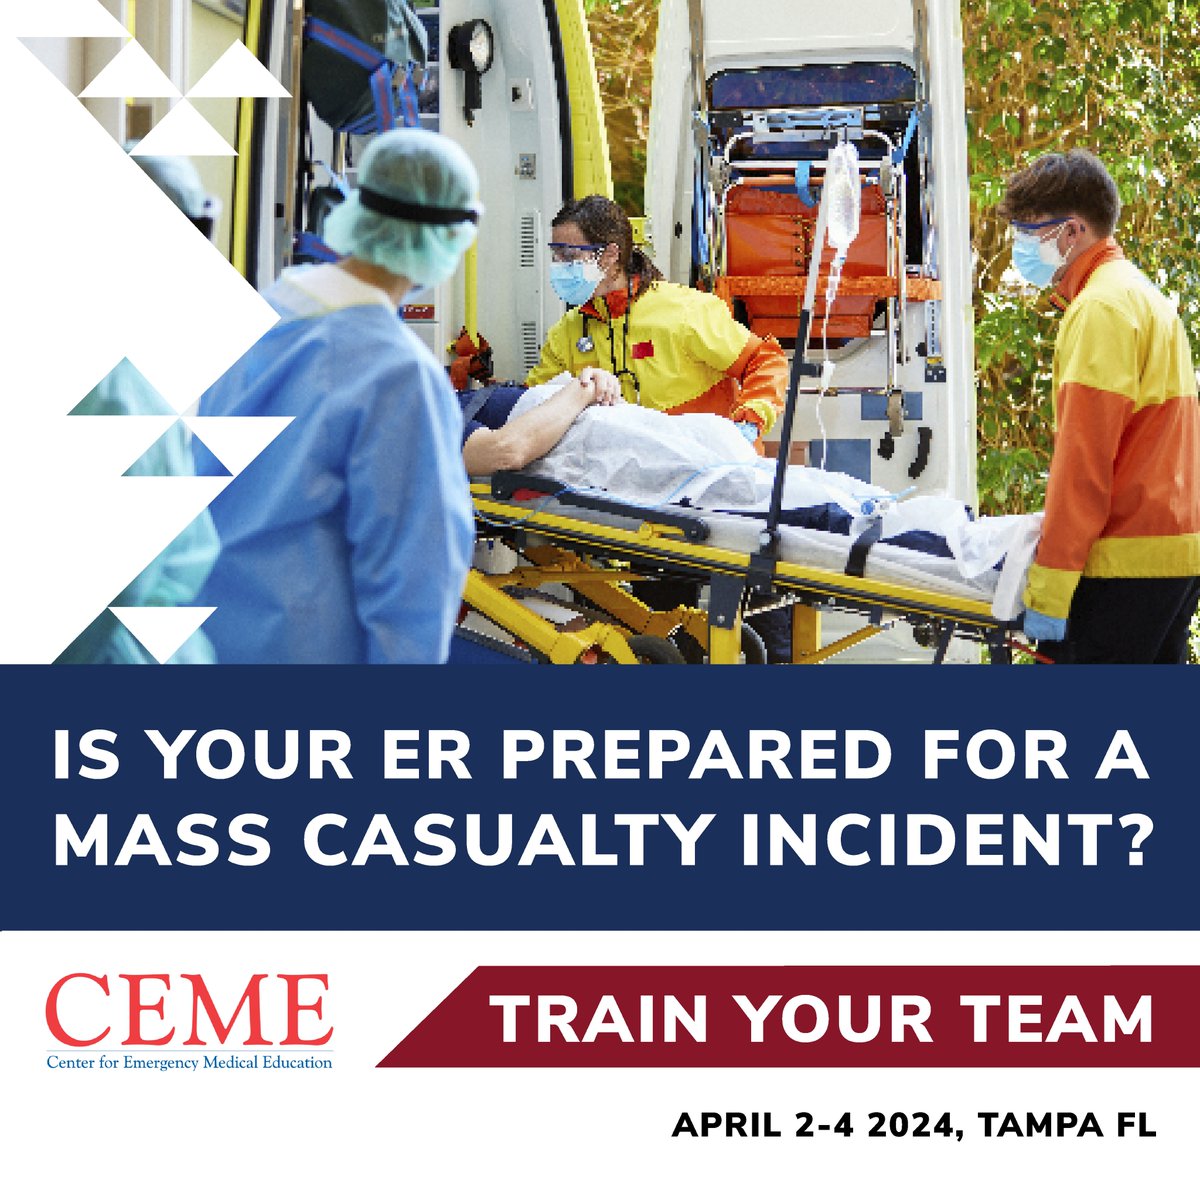 No community is immune from disaster. But as emergency clinicians, you can prepare your team for the worst with this timely training April 2-4, 2024 in Tampa, FL. Spots are limited, so secure your place now: bit.ly/4anvRTw